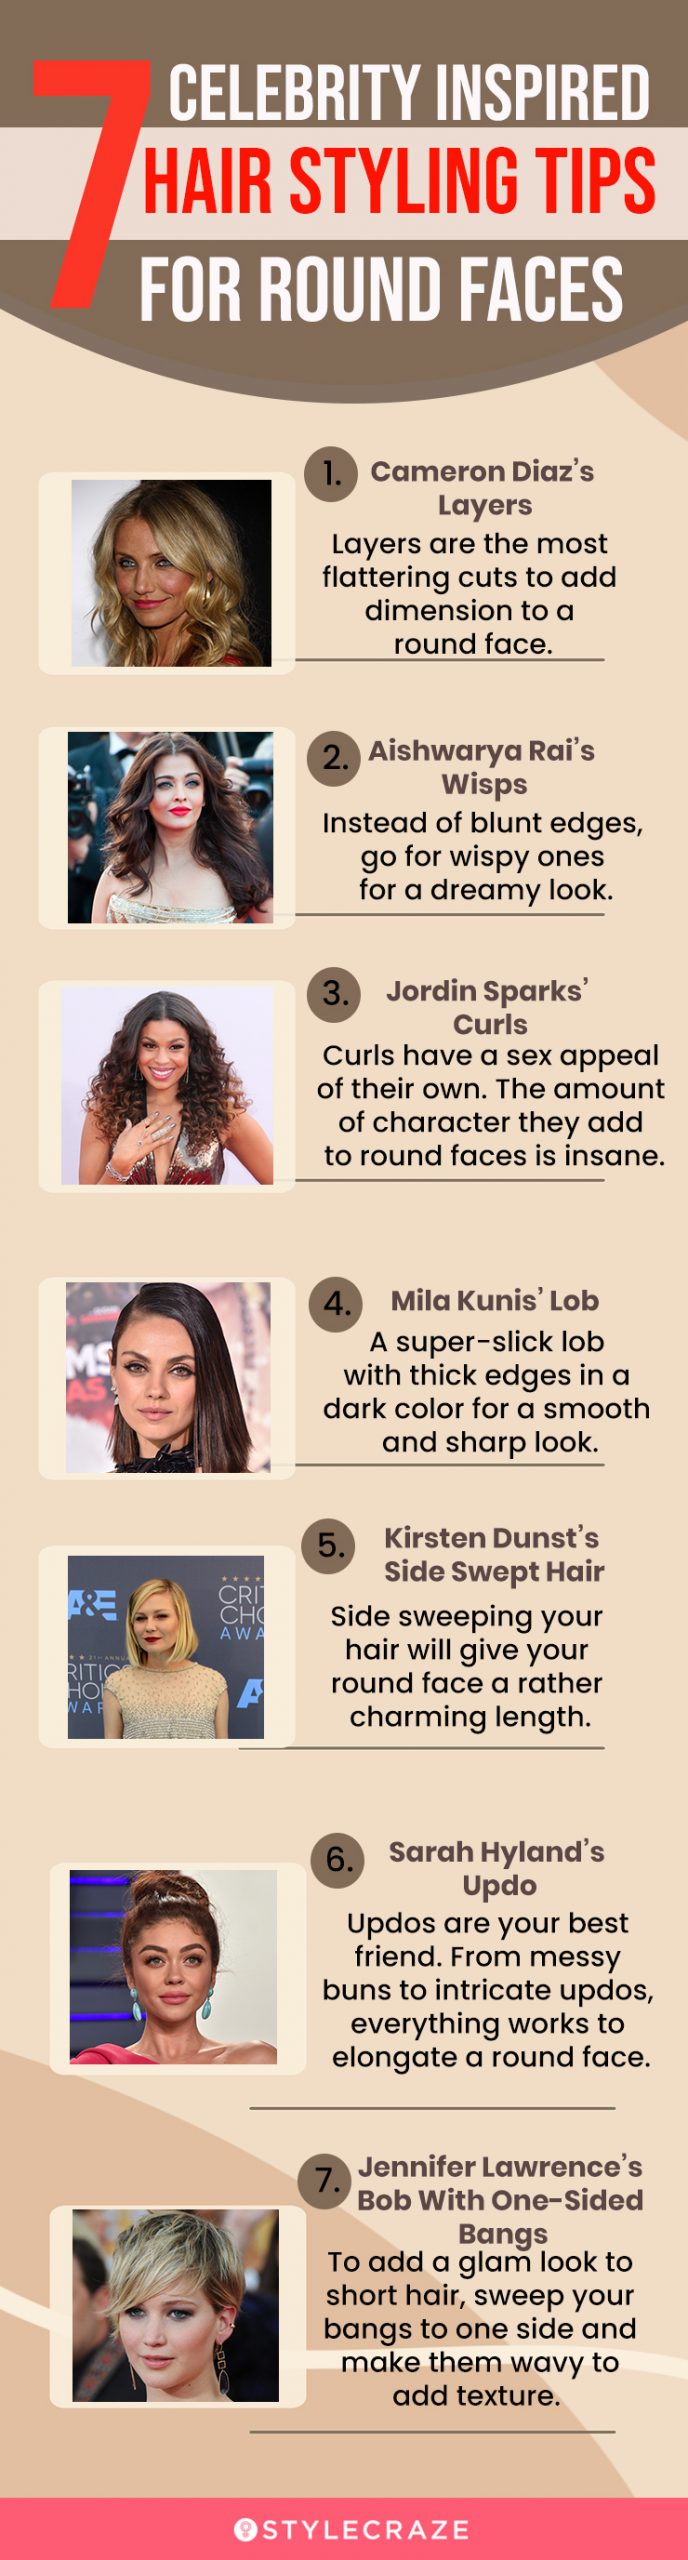 7 celebrity inspired hair styling tips for round faces [infographic]